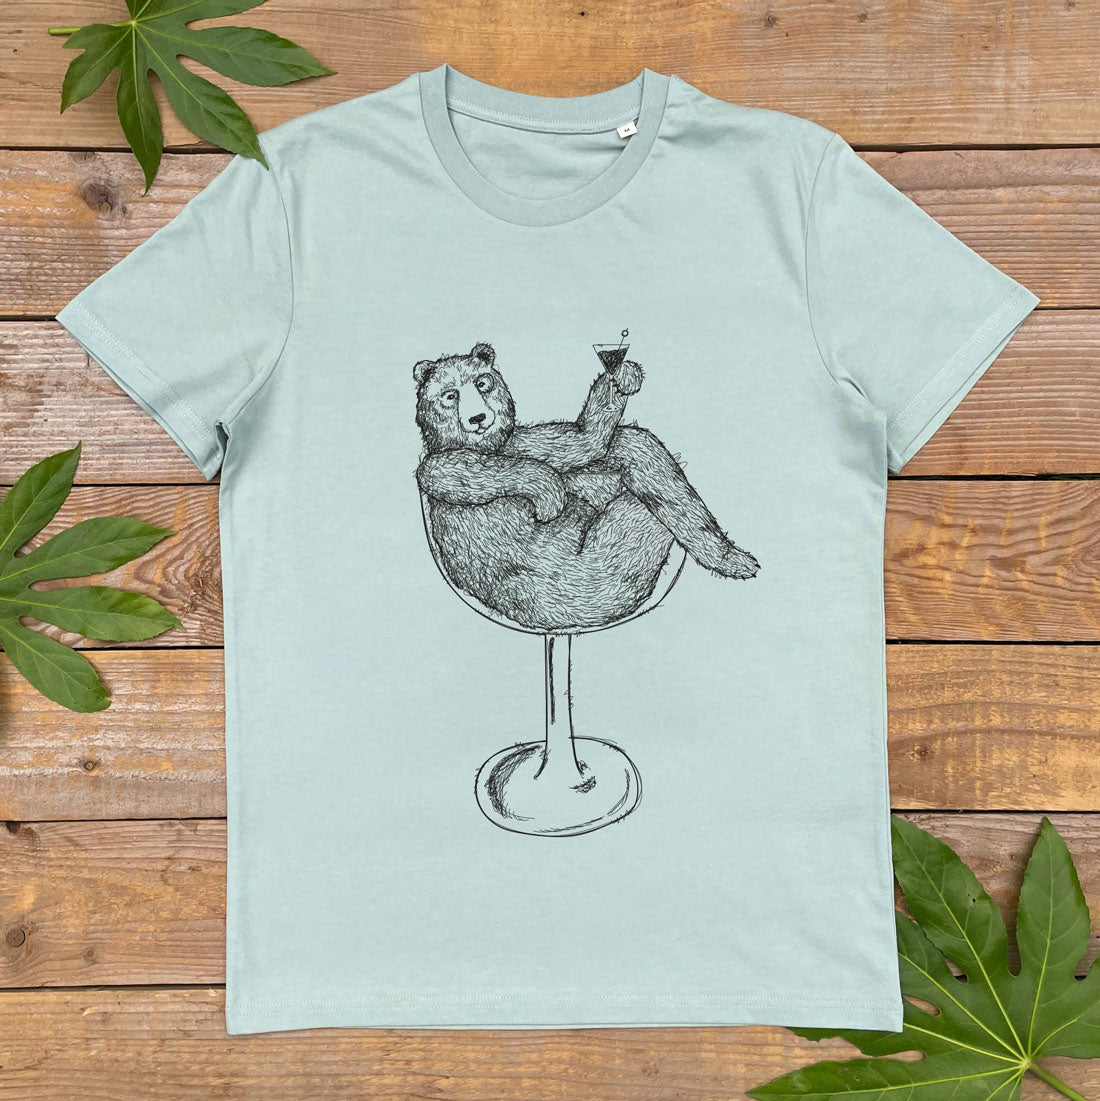 mint tshirt with bear sat in wine glass